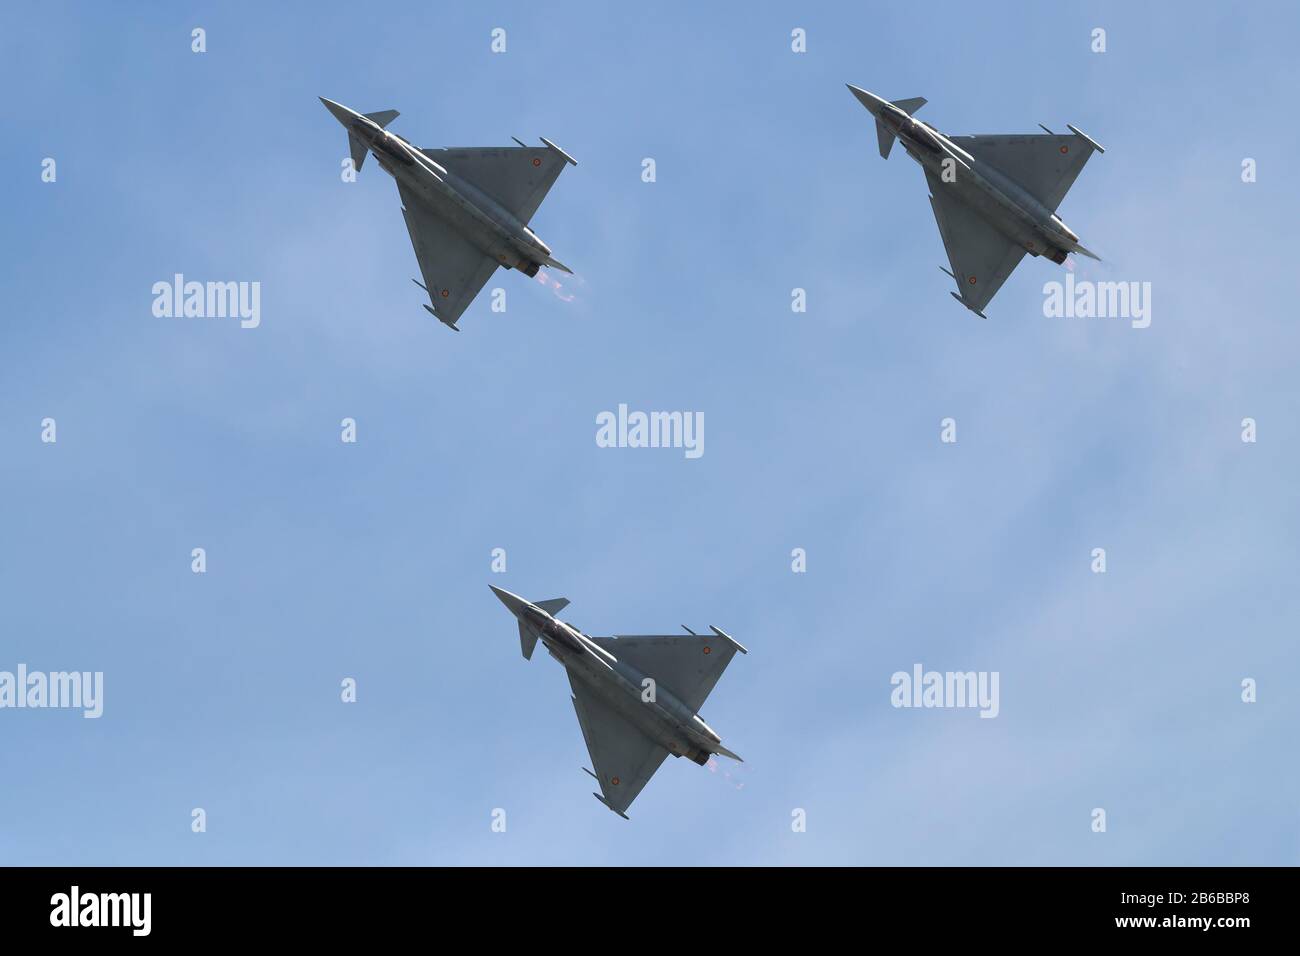 Spanish air force Fighter jet planes on display Stock Photo